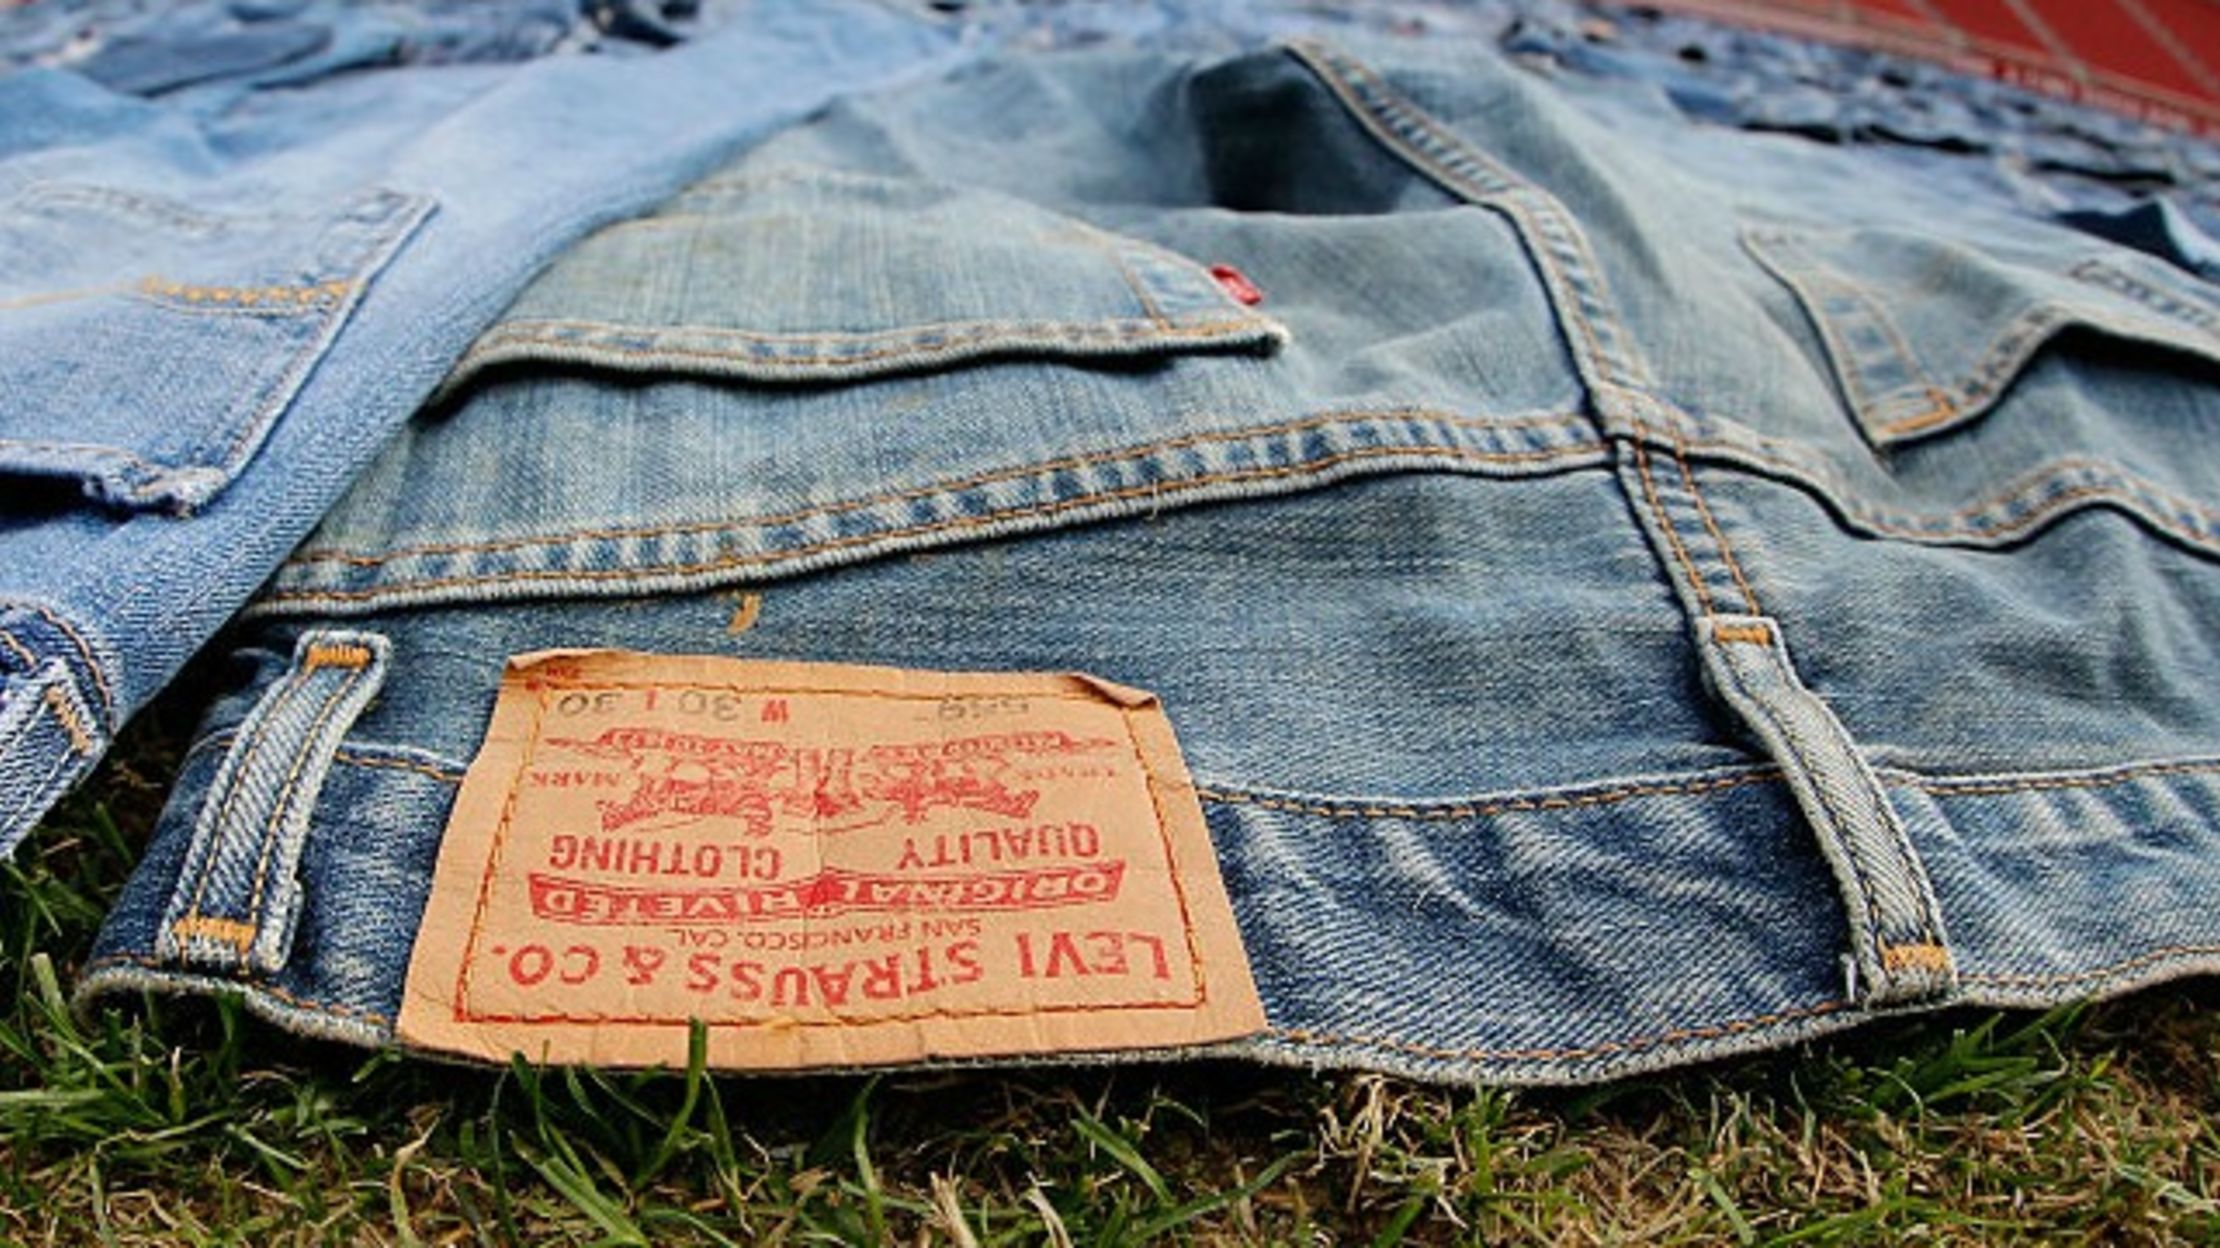 facts about levi strauss